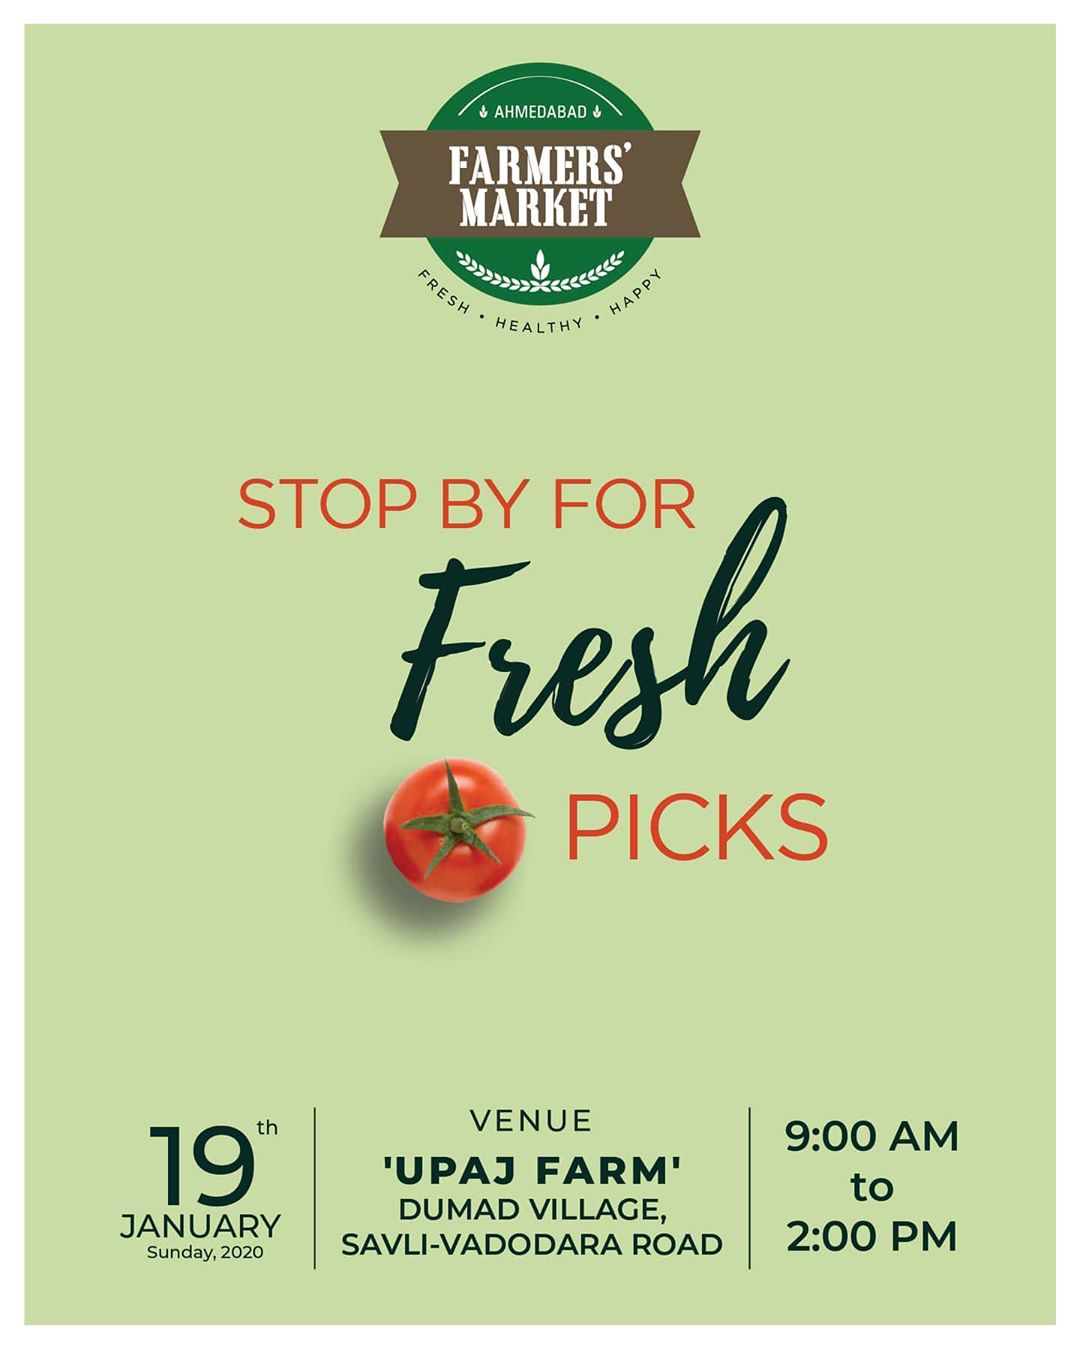 Hey Barodians, we are coming tomorrow with variants of local foods, artisan food creators and lots of fun! Come, explore and celebrate the local food and local food-culture with us! .
.
.
#farmersmarket #afm #ahmedabadfarmersmarket #localmarket #Baroda #supportlocal #localfoods #natural #nutritional #healthy #organicfood #nutrition #healthyliving #fitnessfood #wellness